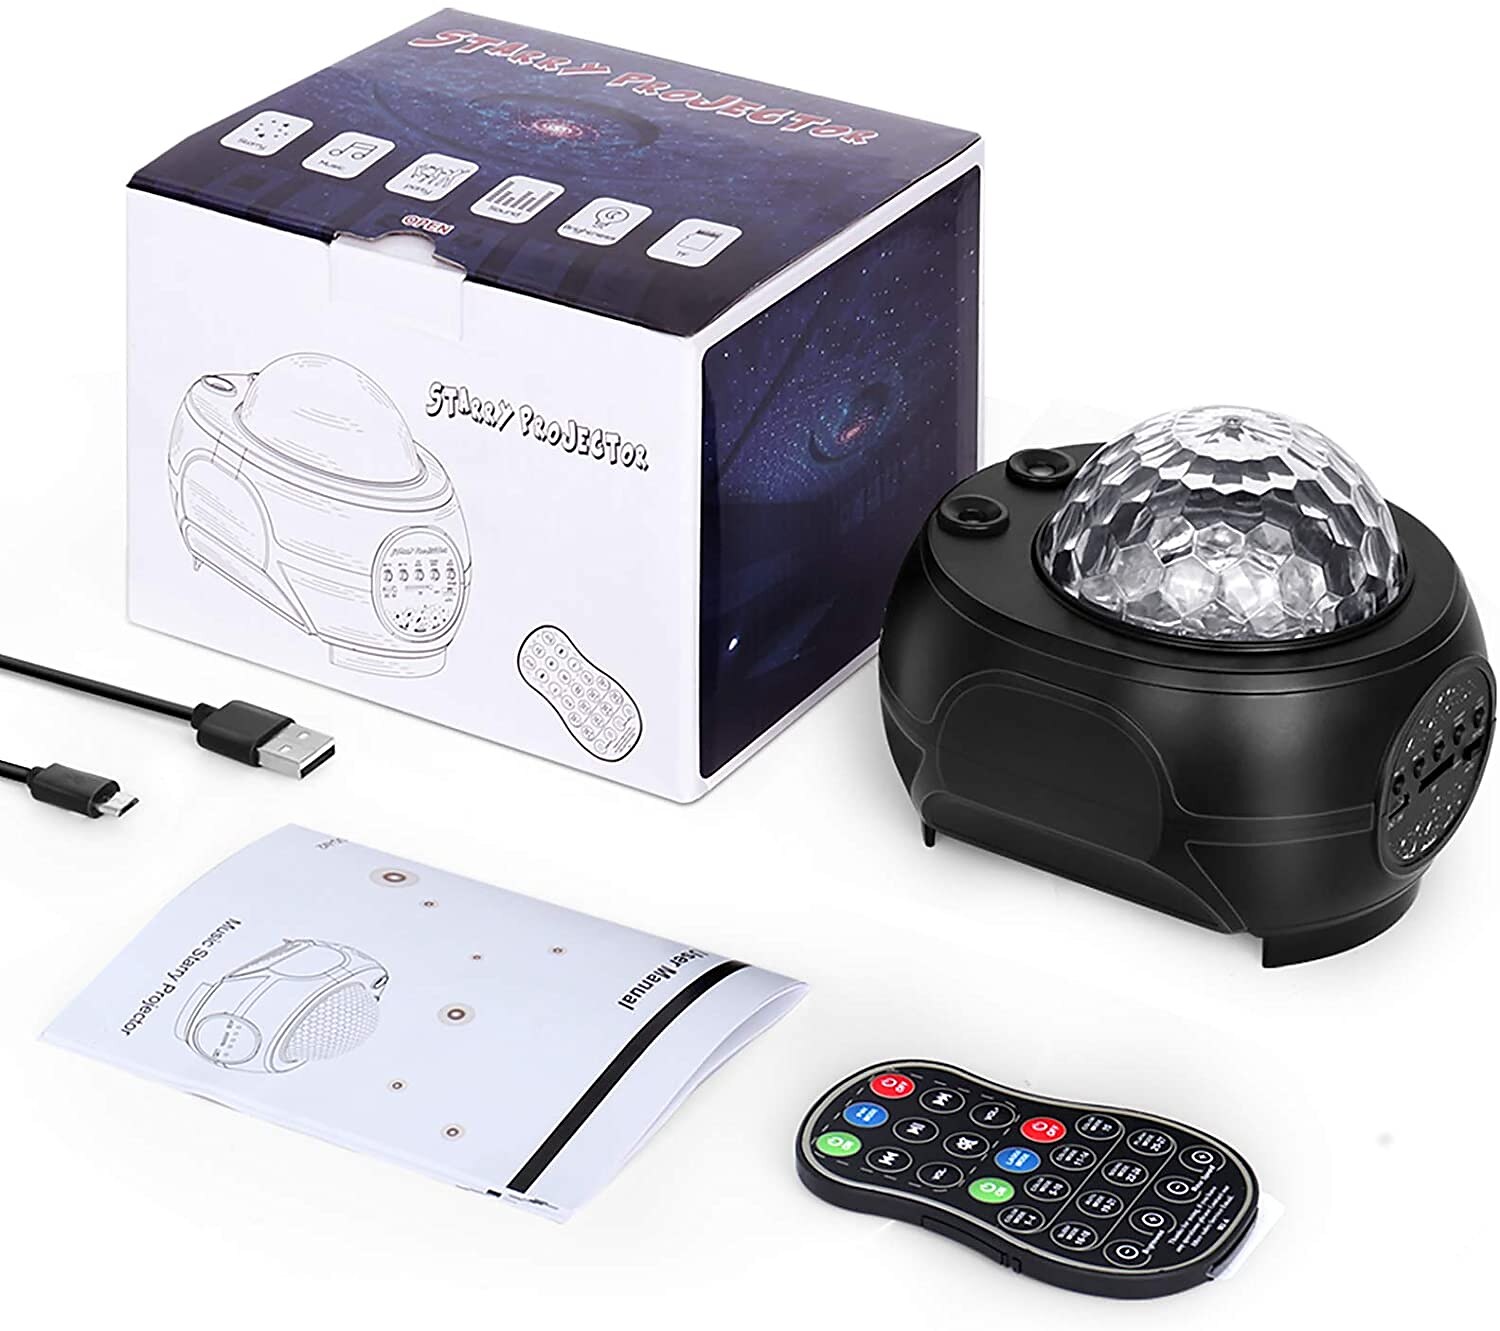 Star Light Show Projector White Color KisMee LED Nebula Projector with Red Galaxy Starry Projector Light Build-in Hi-Fi Stereo Music Speaker for Bedroom/Pary/Birthday Gifts/Home Theatre 